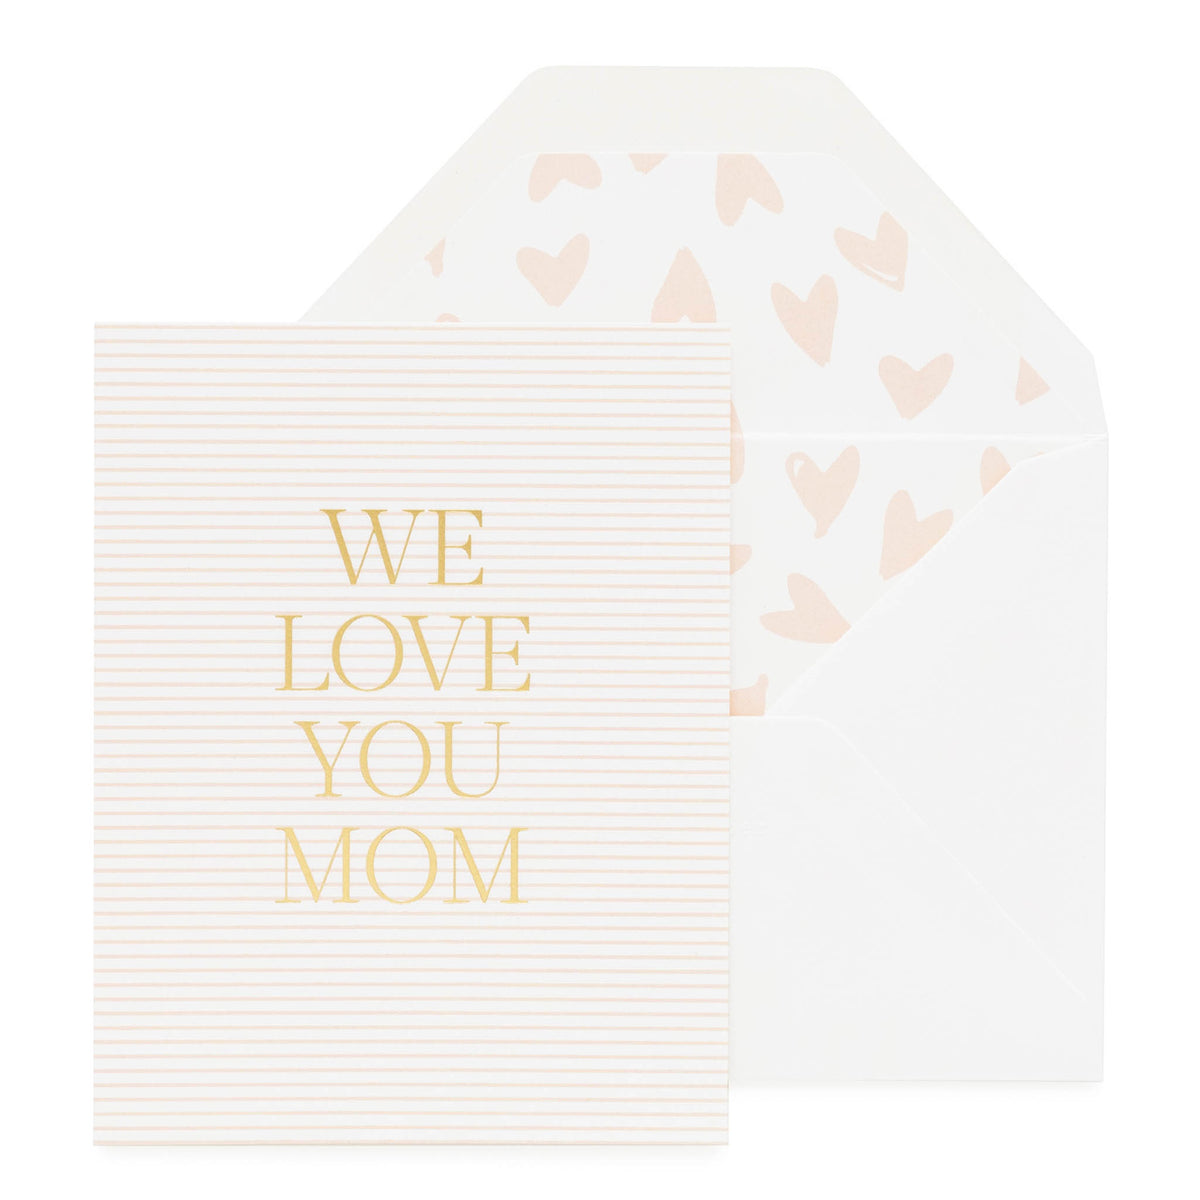 Pink stripe card printed in gold foil We love you mom with a pink heart lined envelope